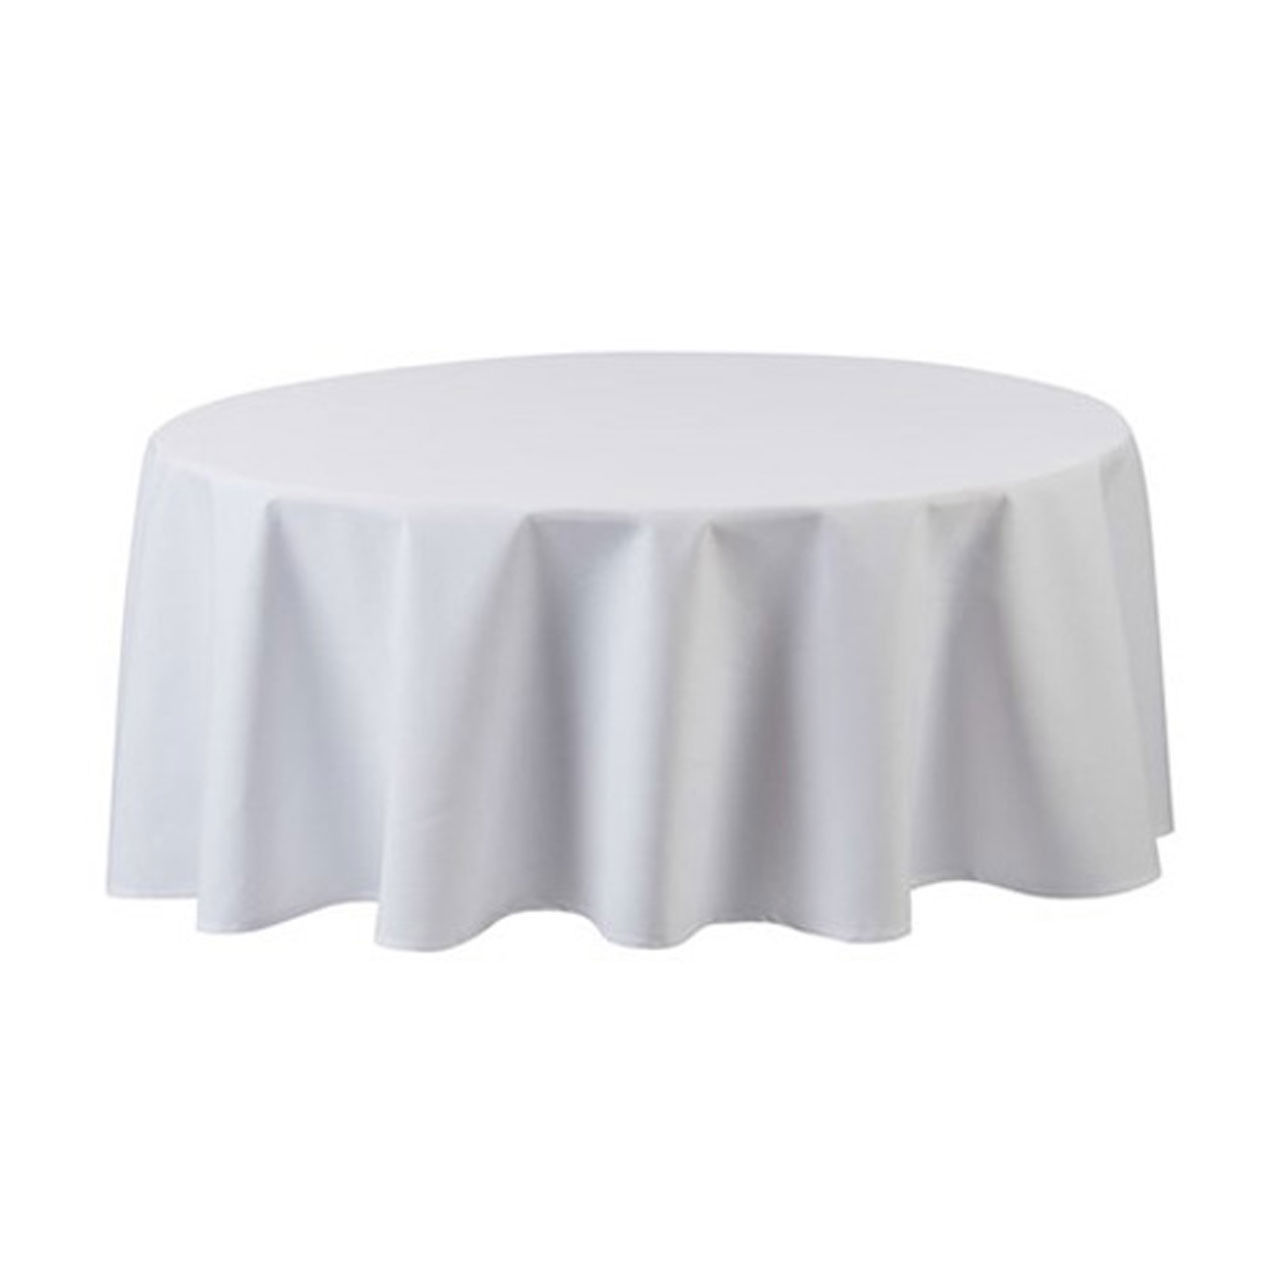 What are the samples available for the Seamless White 120 Round Tablecloth?